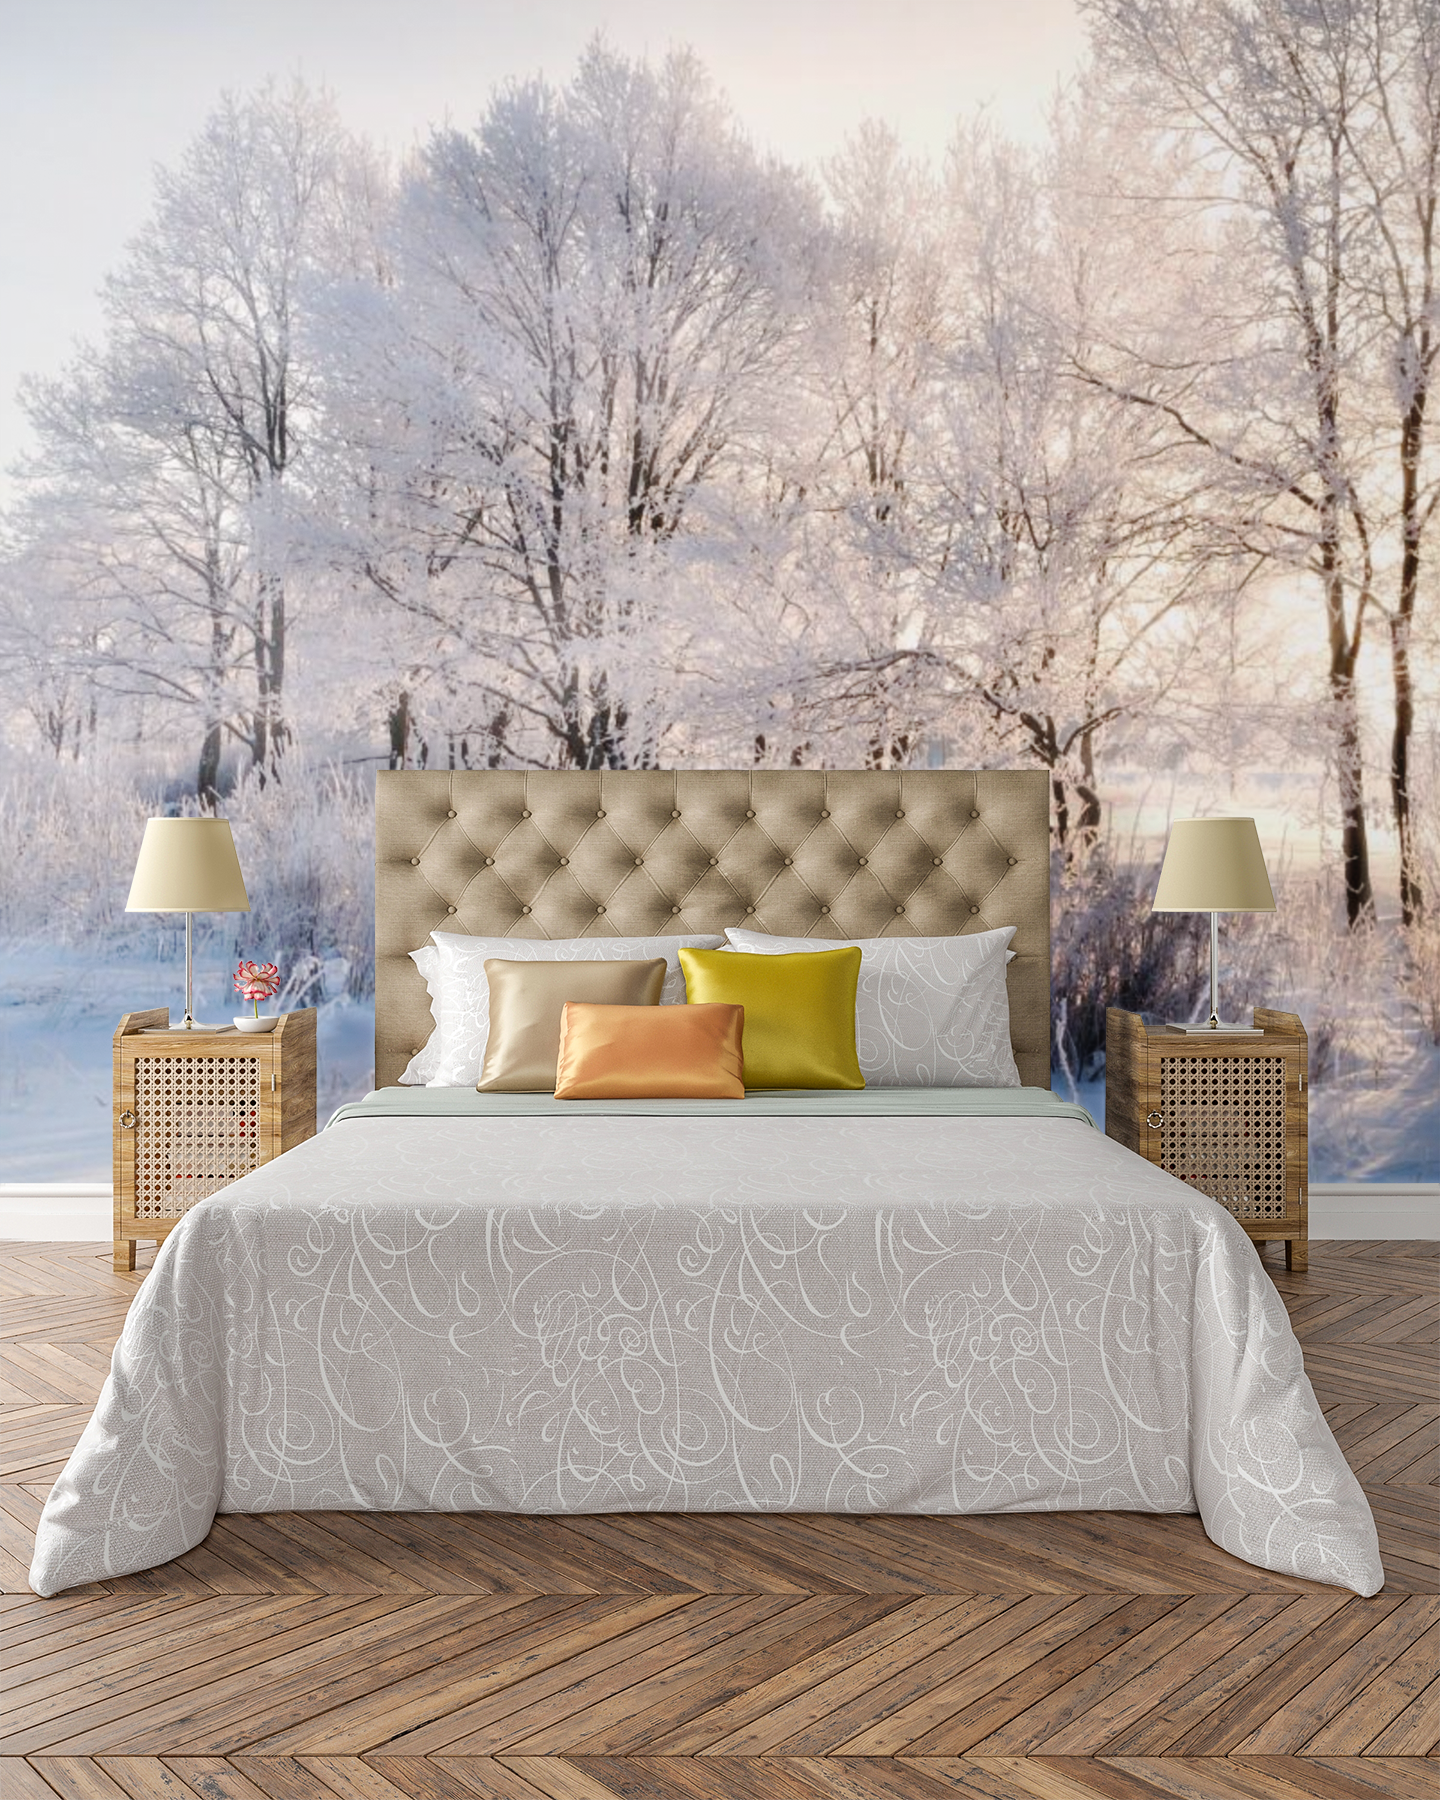 Frosted Trees  - 02199 - Wall Murals Printing - wall art